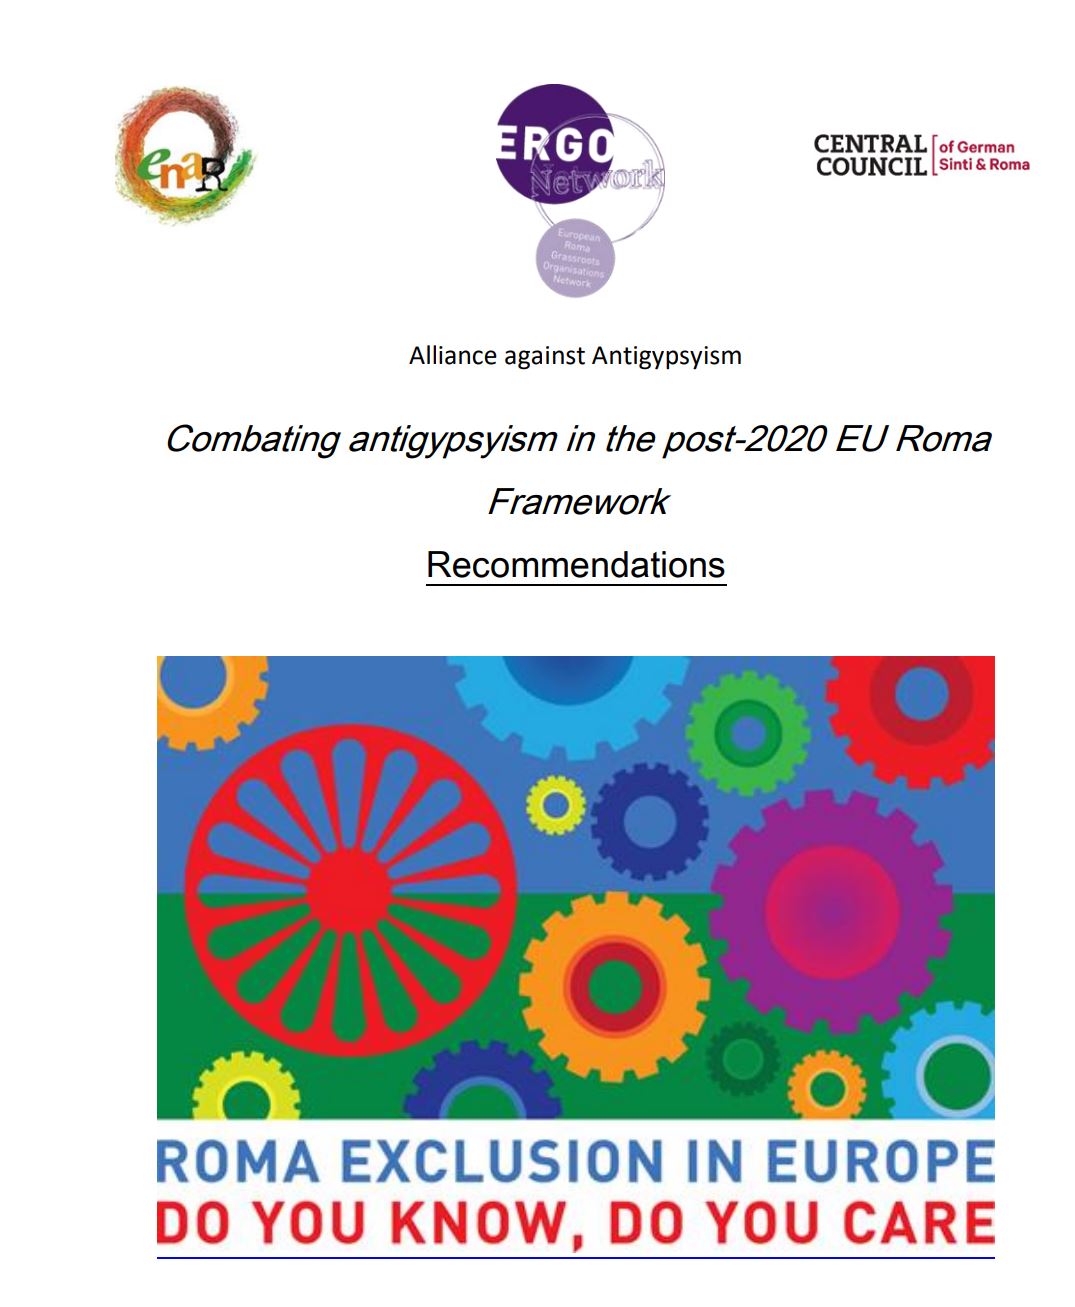 Image for combating Anti Gypsyism in the Post 2020 EU Roma Framework